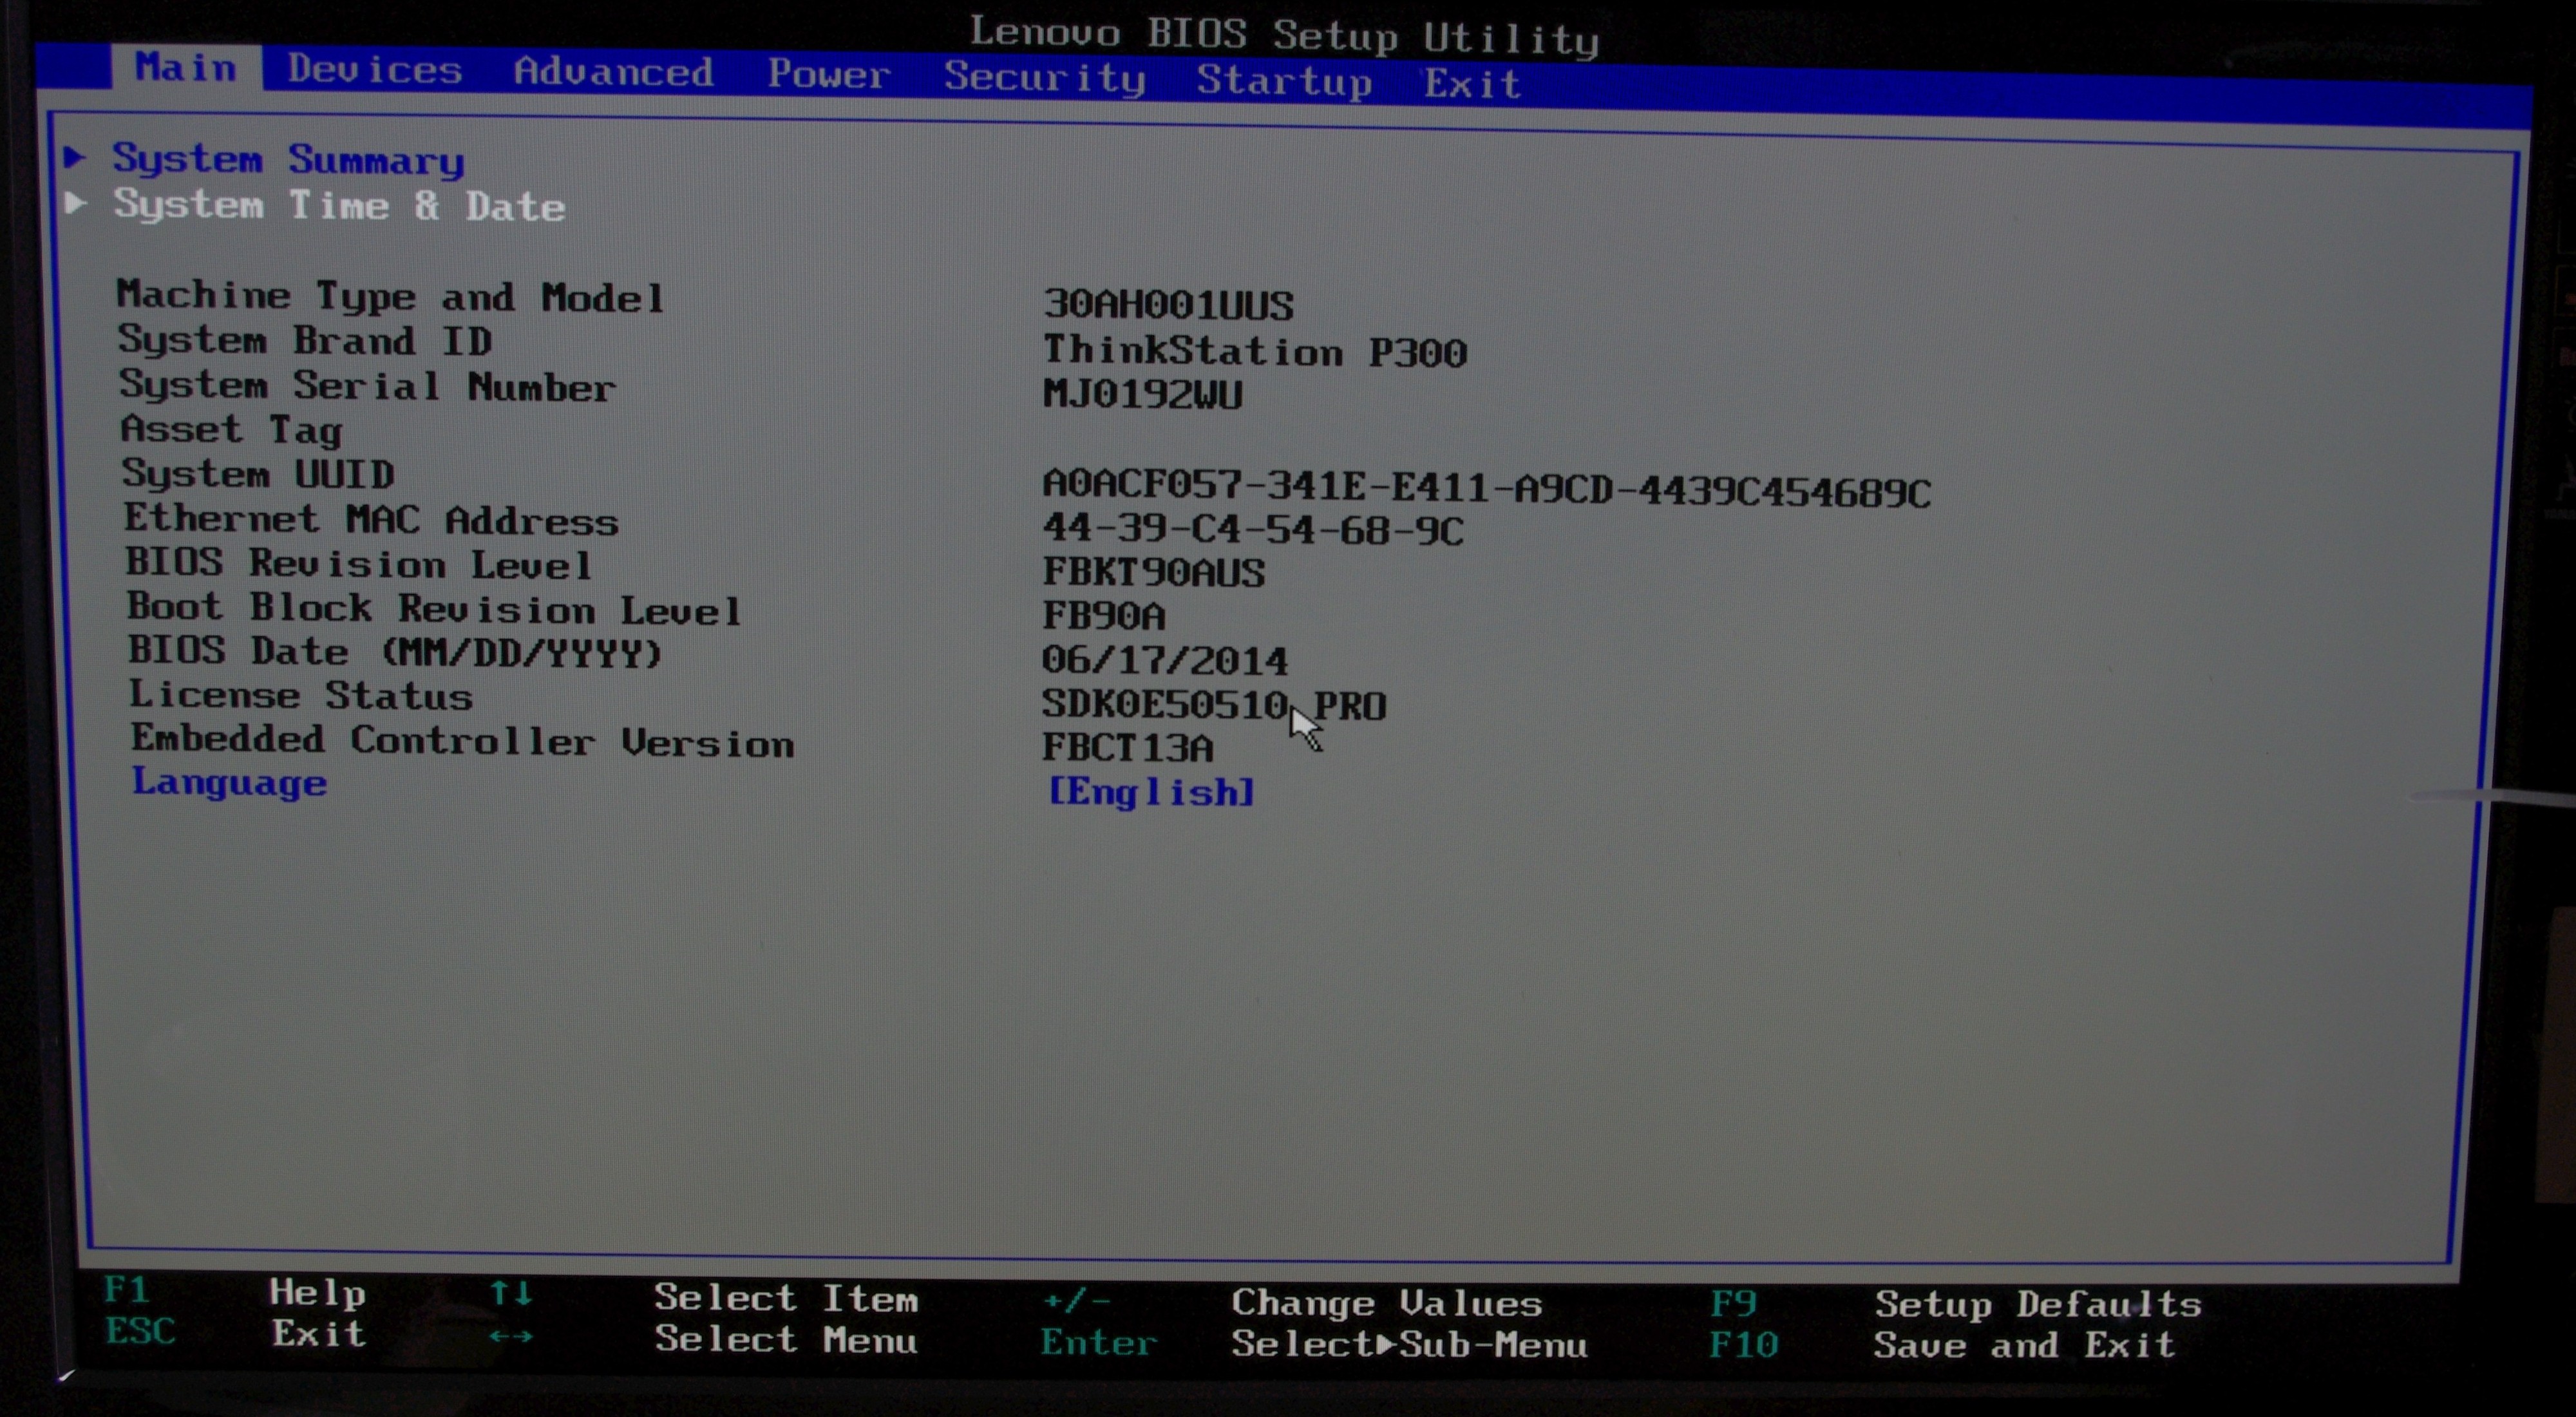 How To Update Serial Number In Bios Lenovo